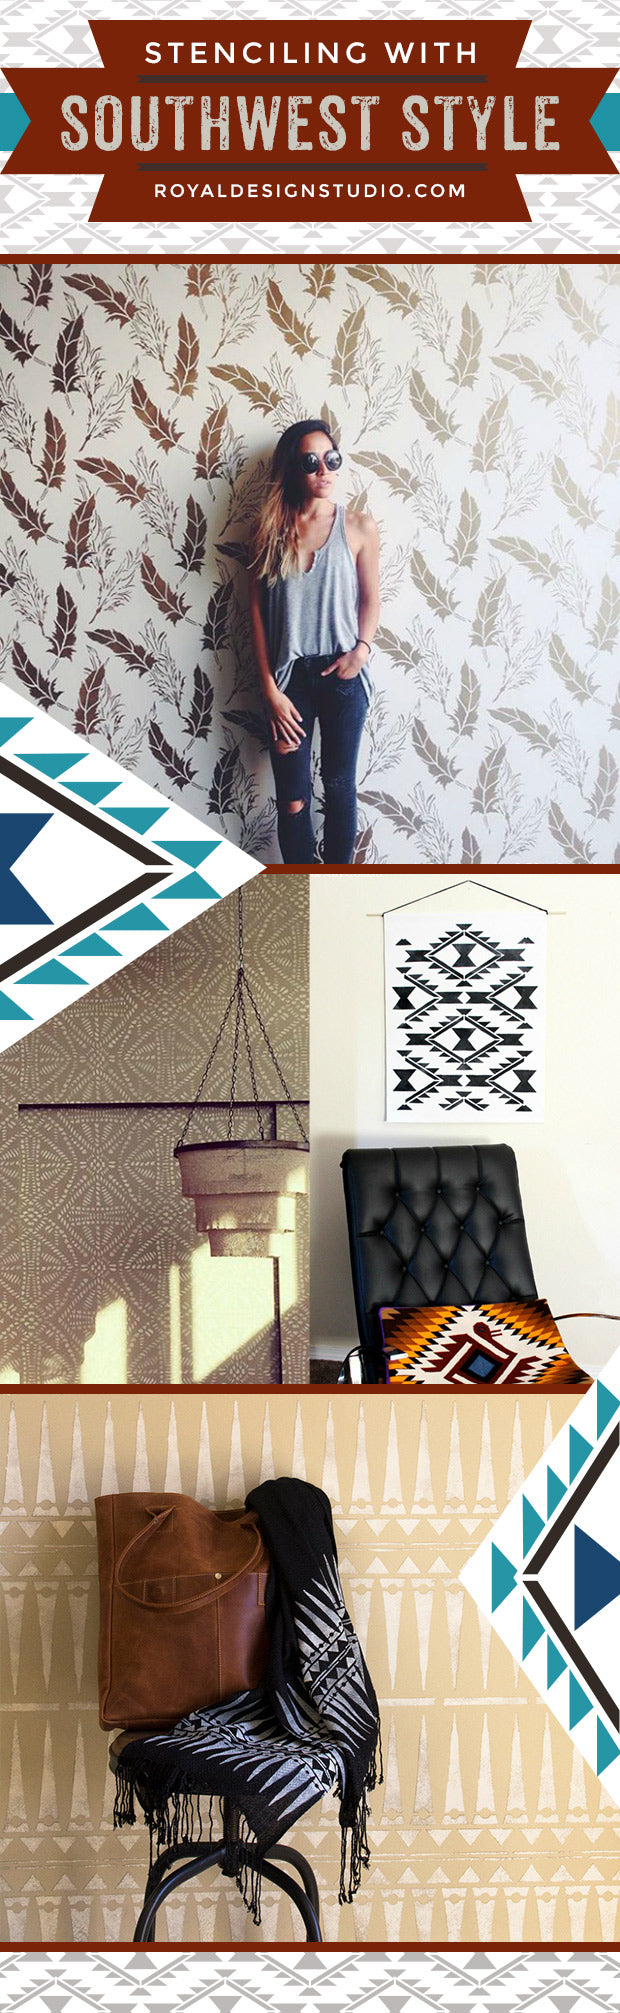 Stenciling with Southwest Style - Royal Design Studio Stencils and DIY Decor Ideas